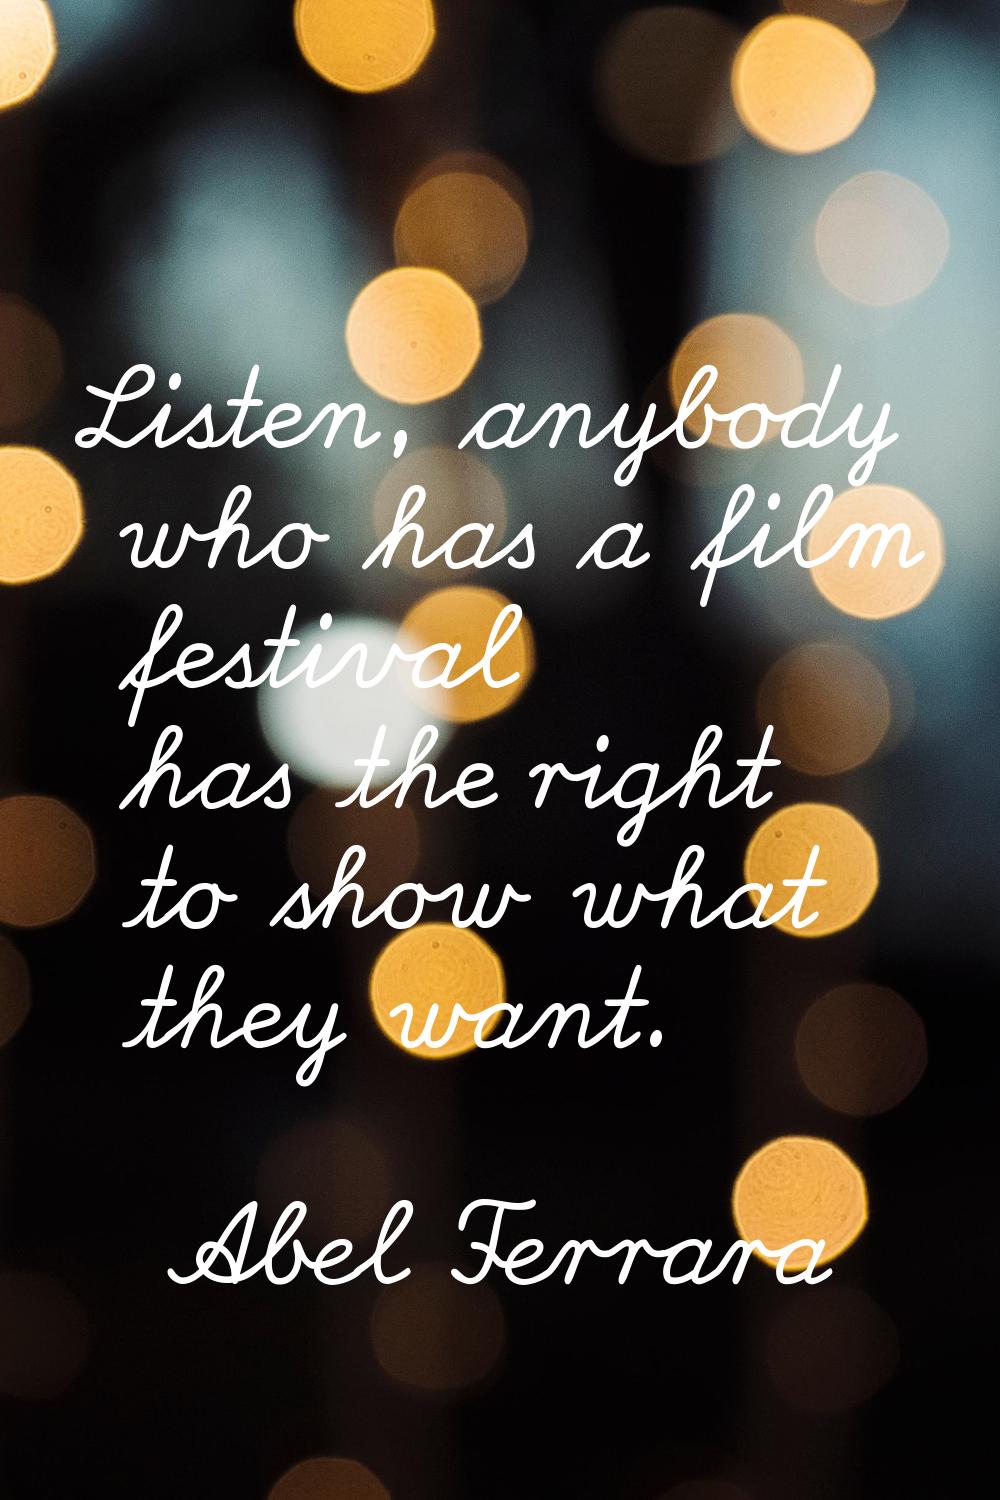 Listen, anybody who has a film festival has the right to show what they want.